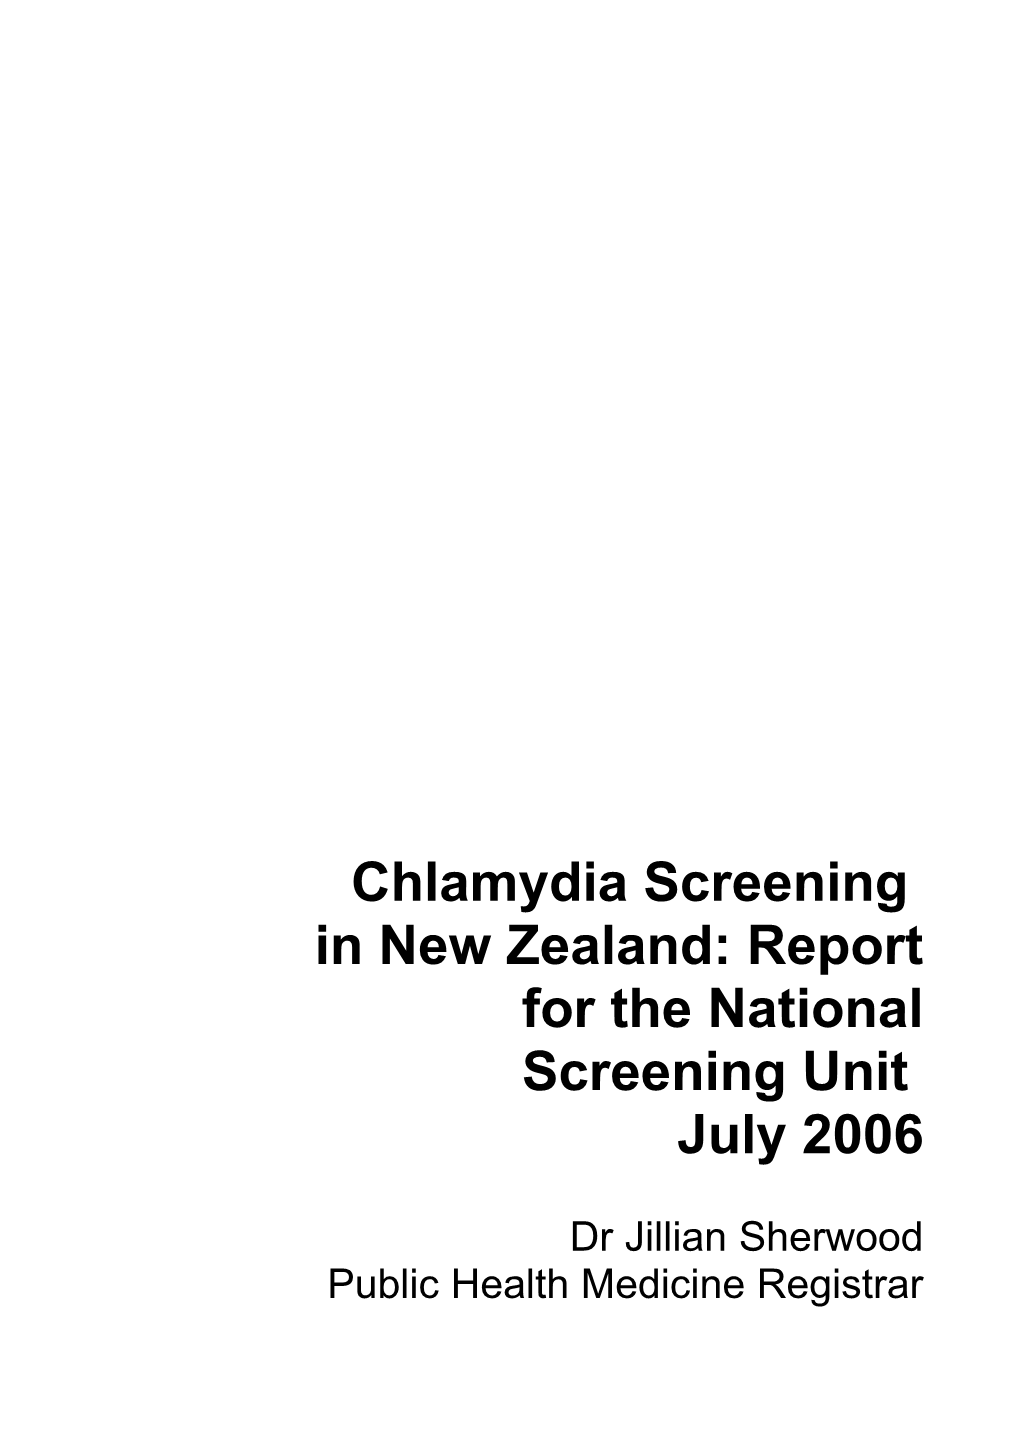 Chlamydia Screening in New Zealand: Report for the National Screening Unit July 2006